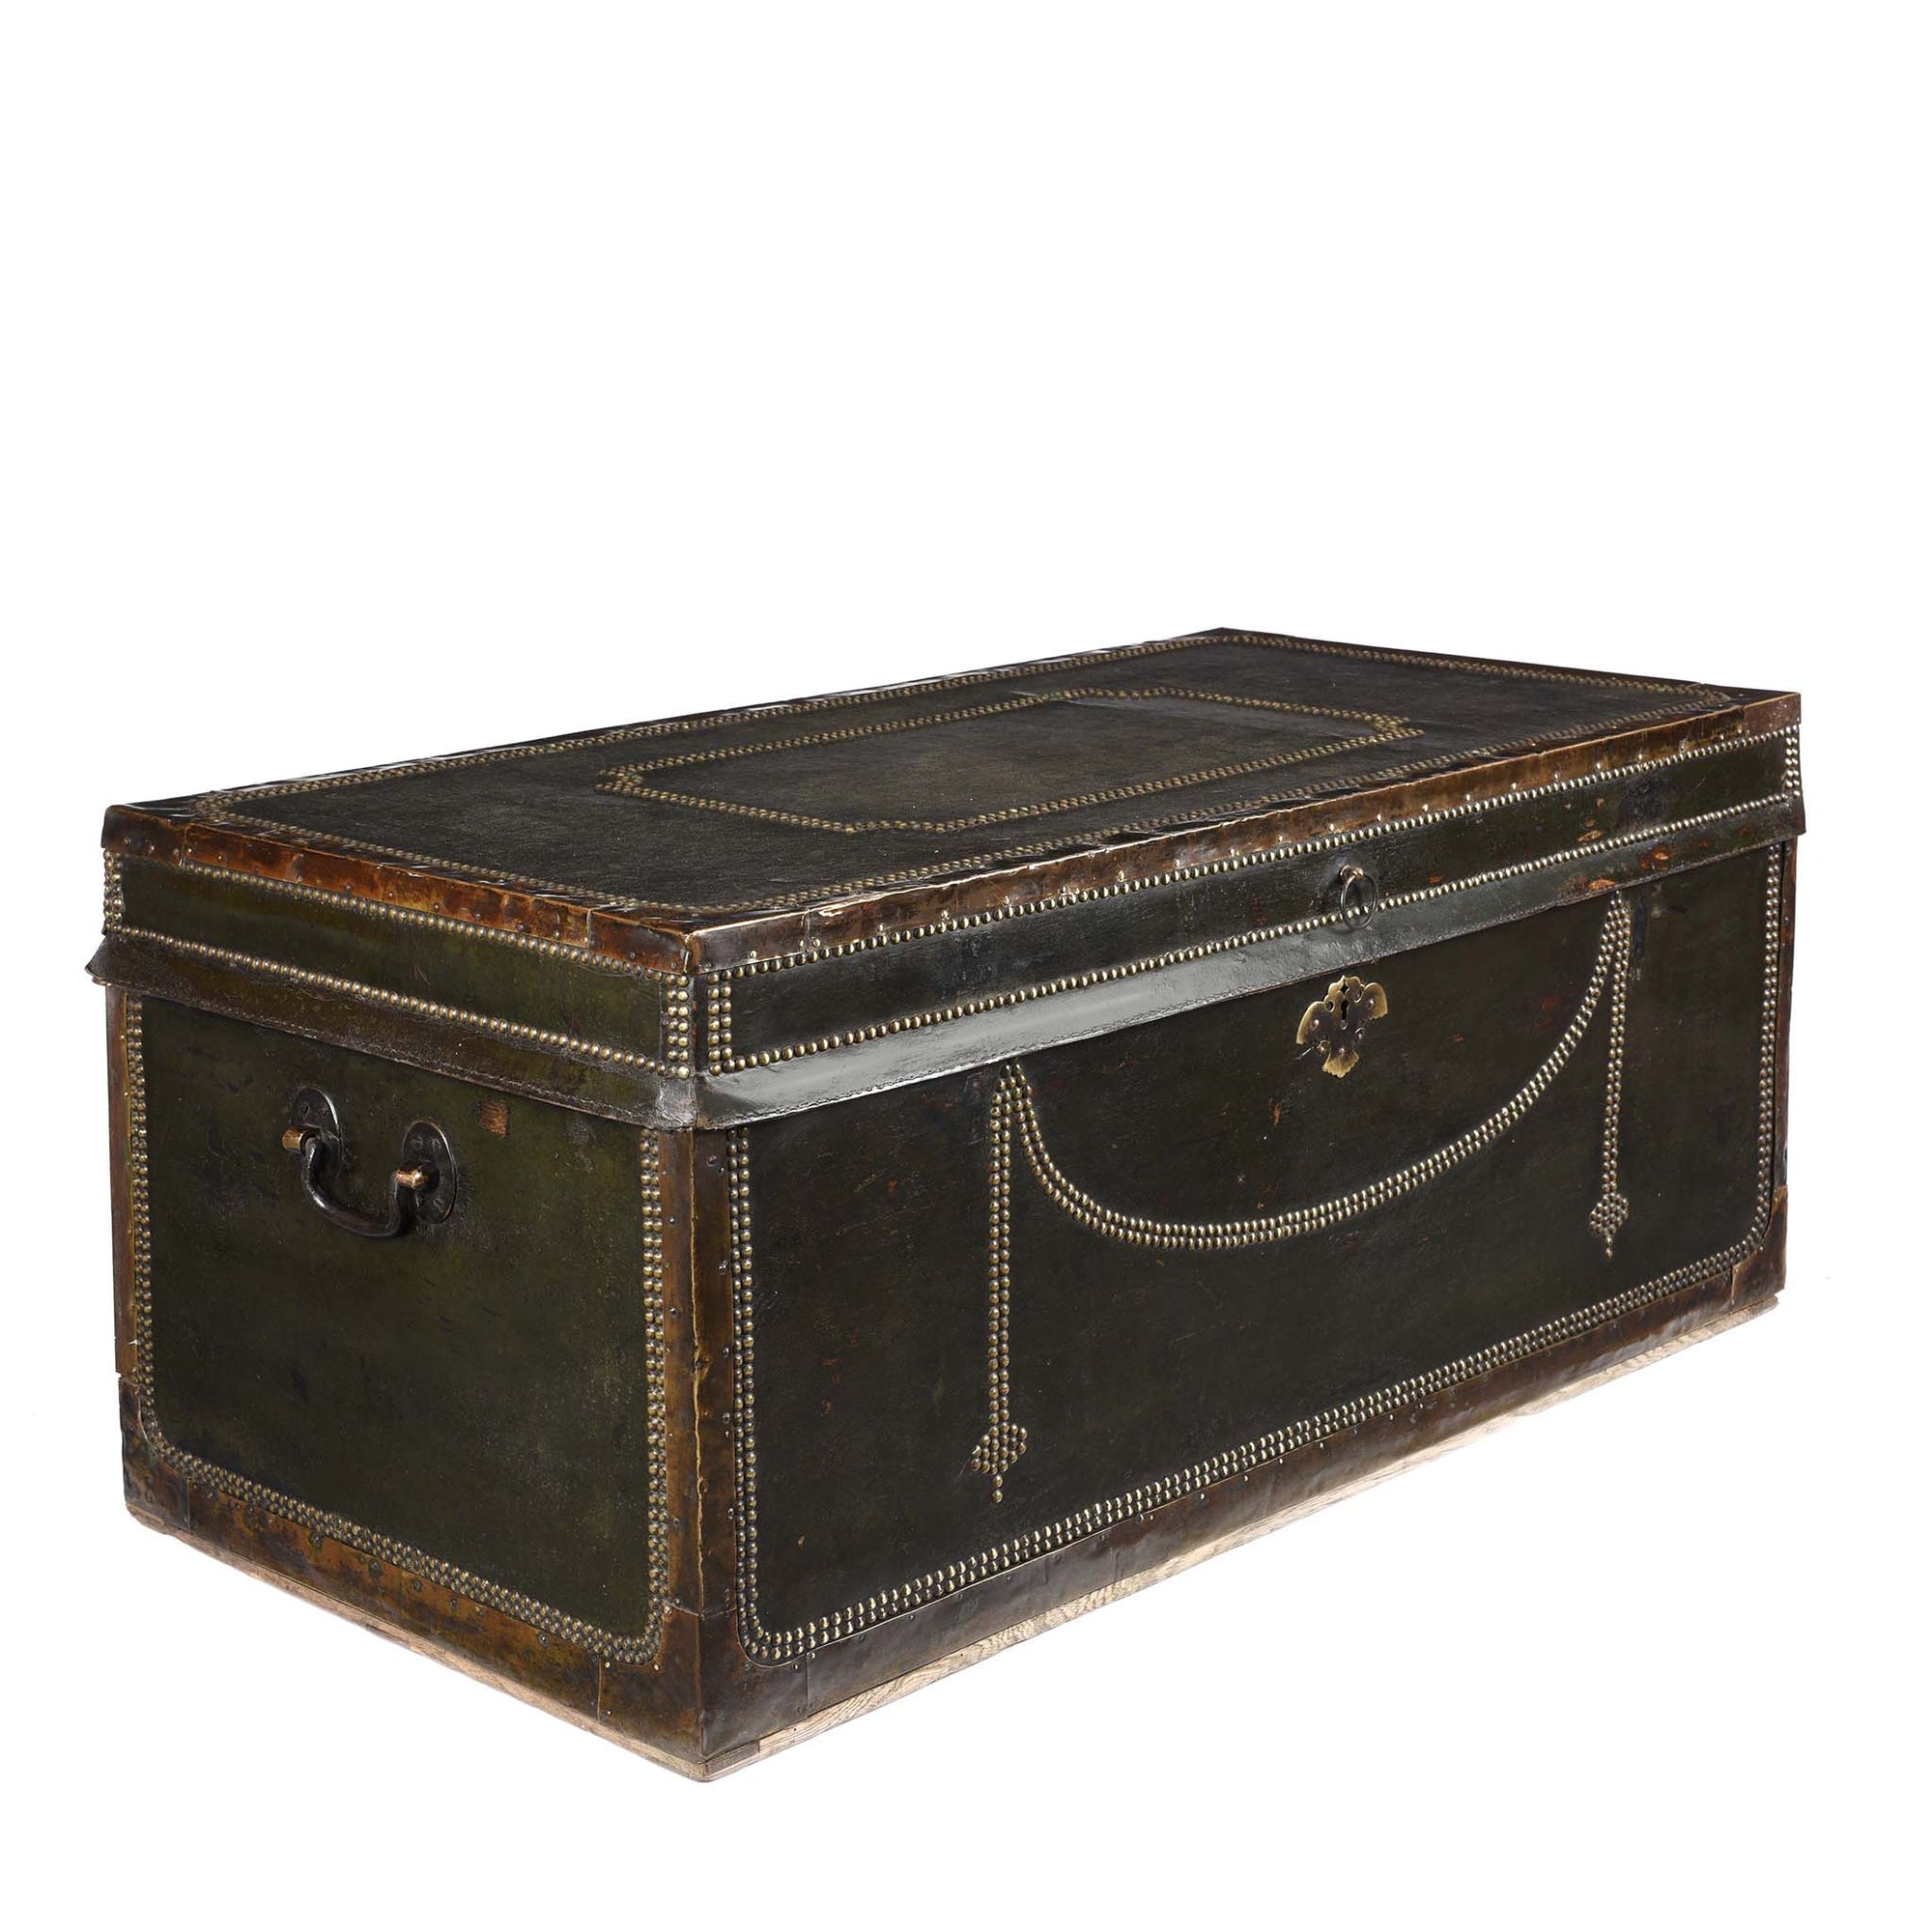 Angled View Of Painted Leather Camphor Trunk - Early 19thC | INDIGO ANTIQUES